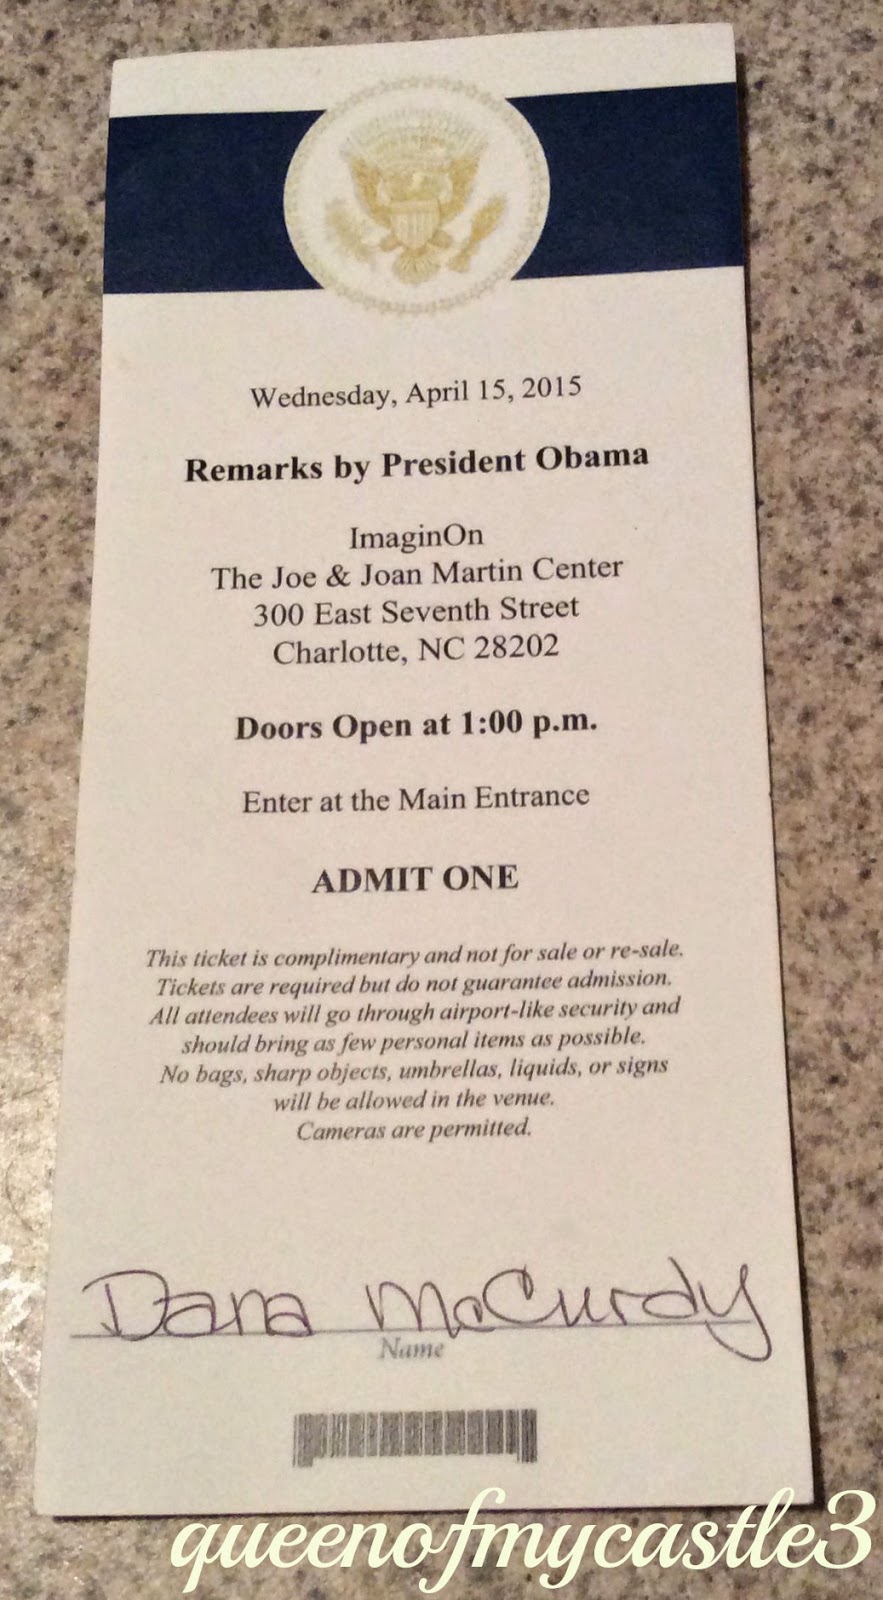 My ticket to see the President